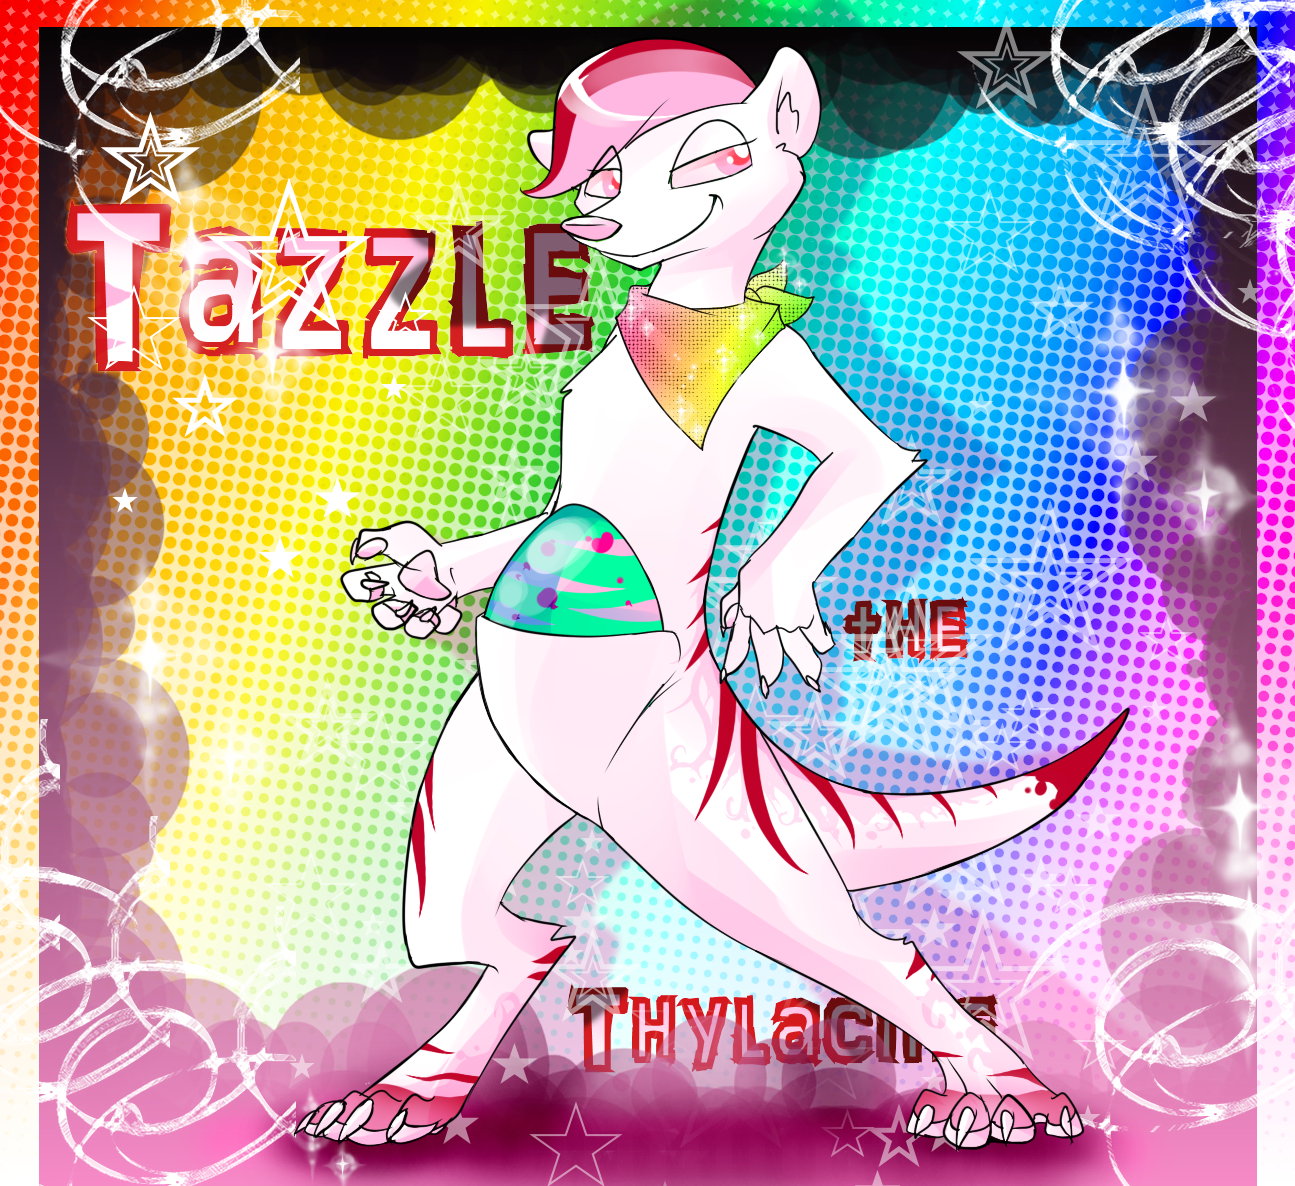 RAZZLE TAZZLE. by Defiance